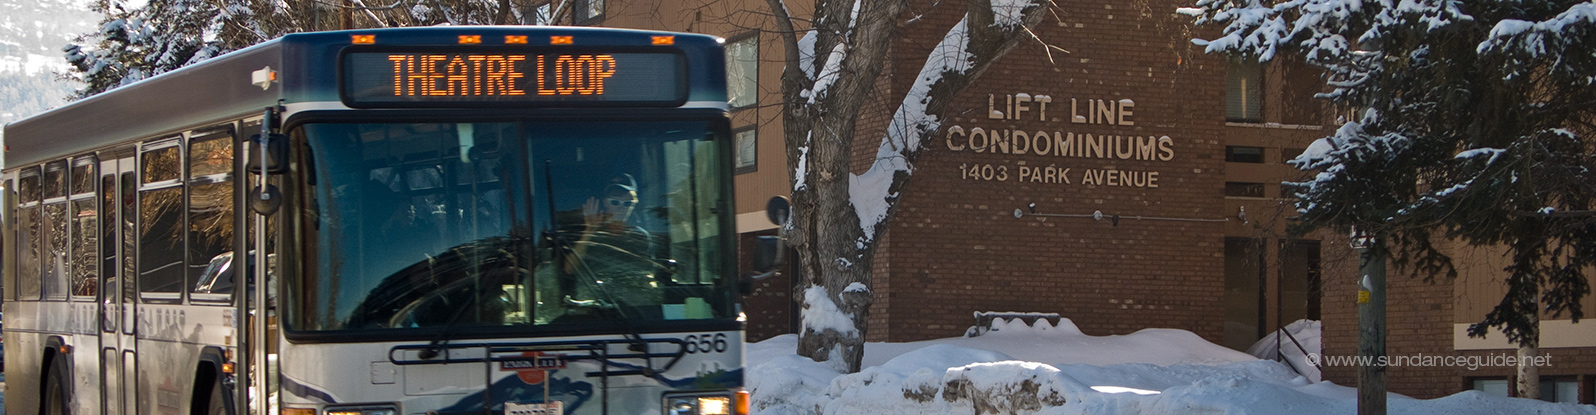 A picture of the Theatre Loop free shuttle bus for the Sundance Film Festival